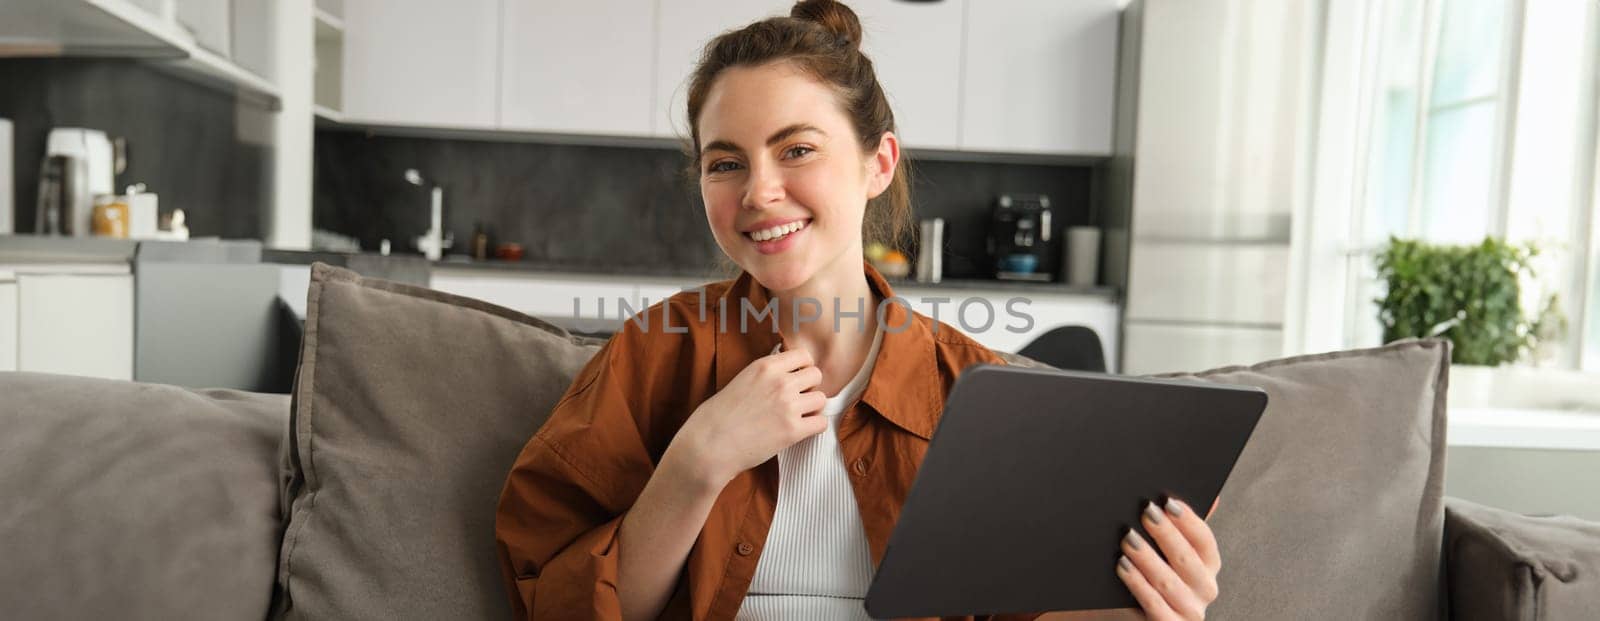 Cute young brunette woman holding digital tablet in hand, sitting on couch, smiling and laughing at camera.